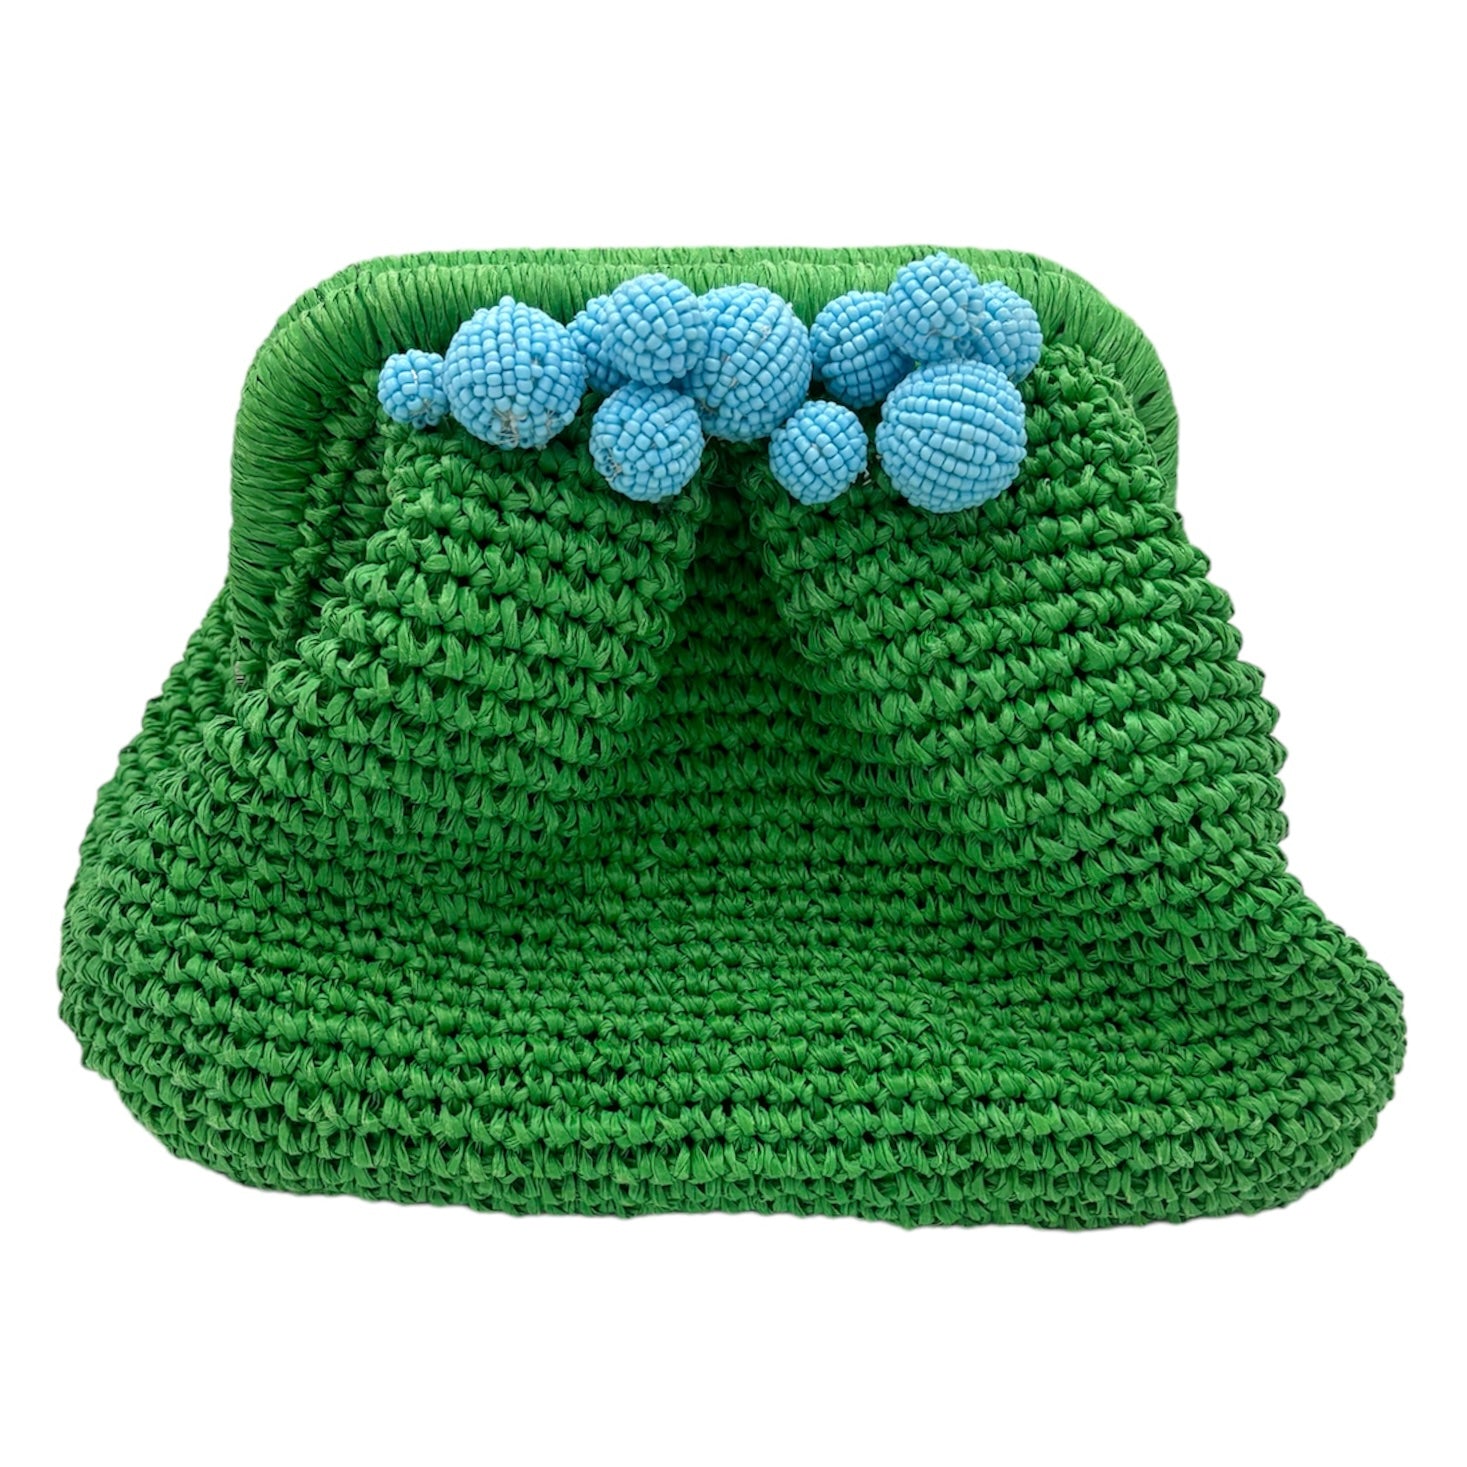 Green Pouch with Blue Beads